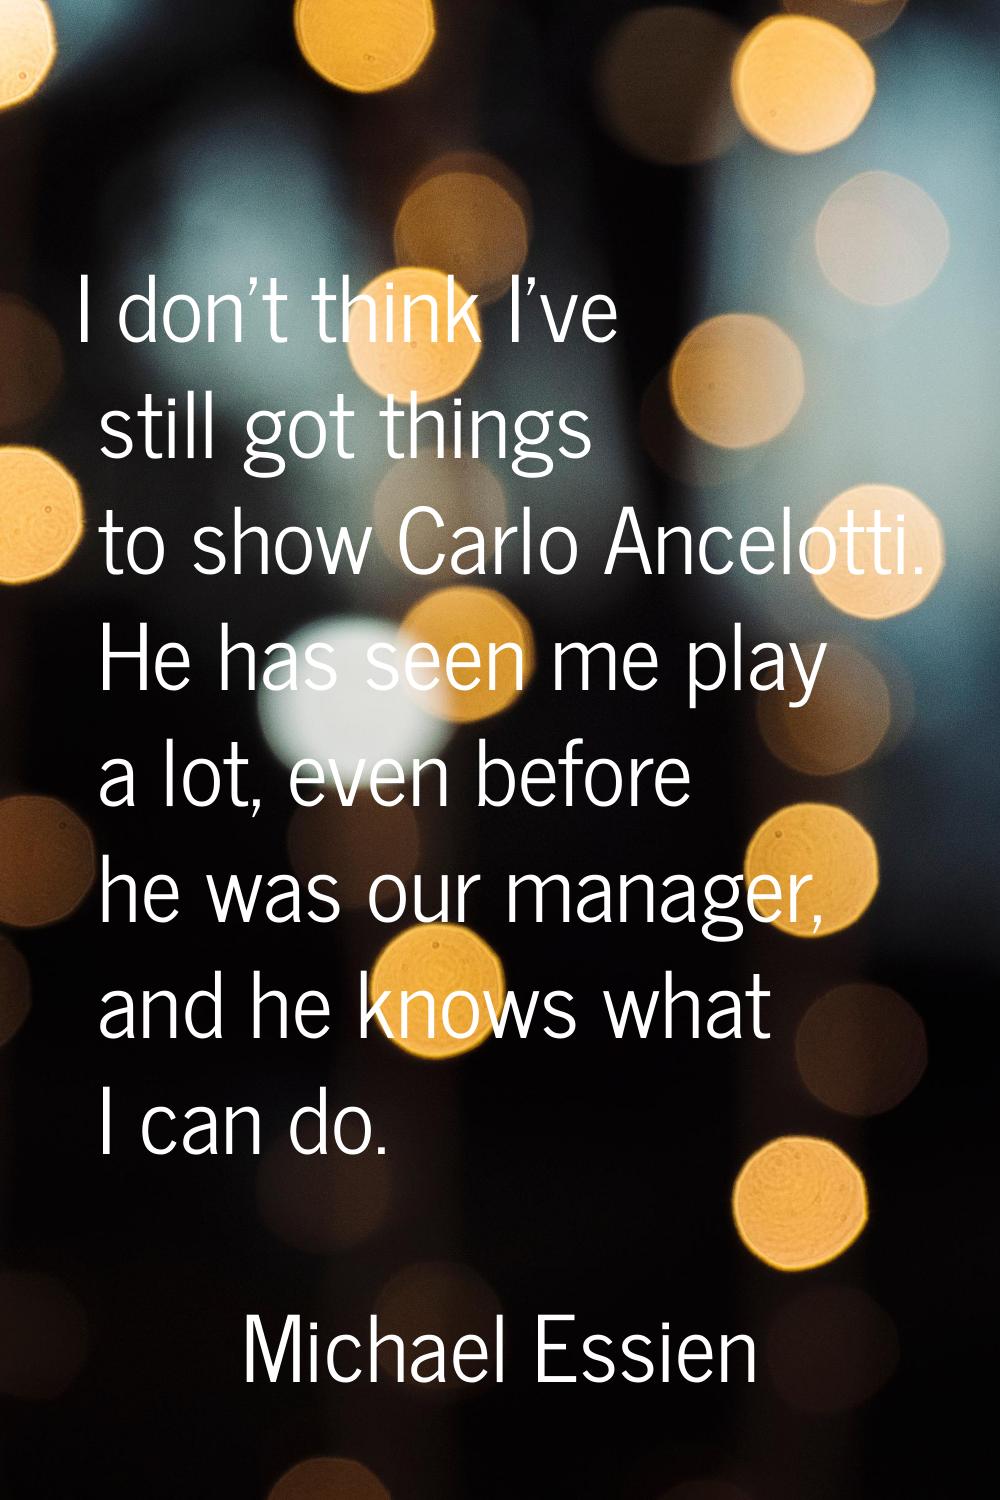 I don't think I've still got things to show Carlo Ancelotti. He has seen me play a lot, even before